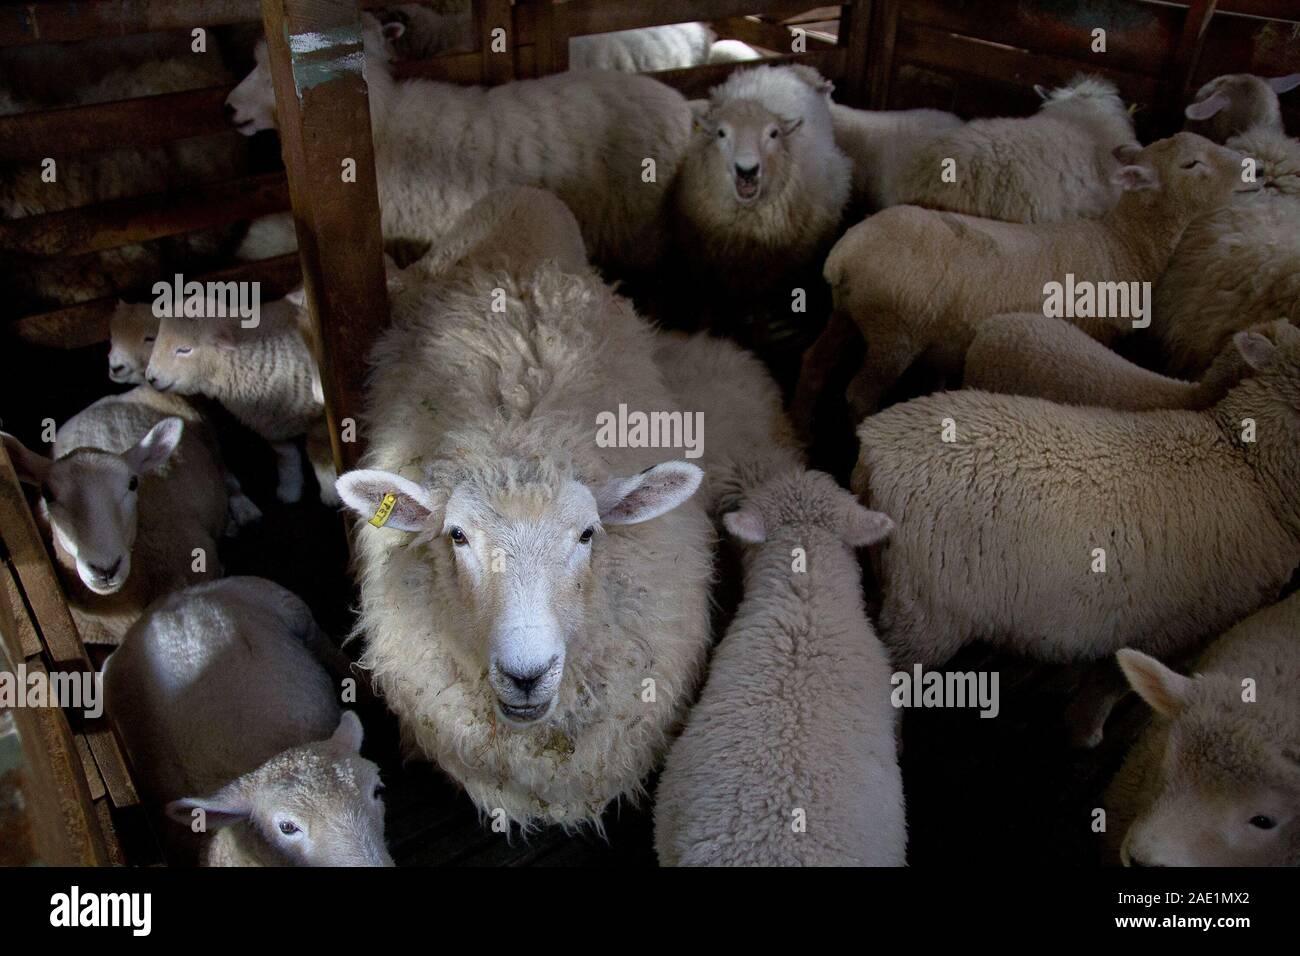 Small flock of sheep in a pen in a barn. Stock Photo